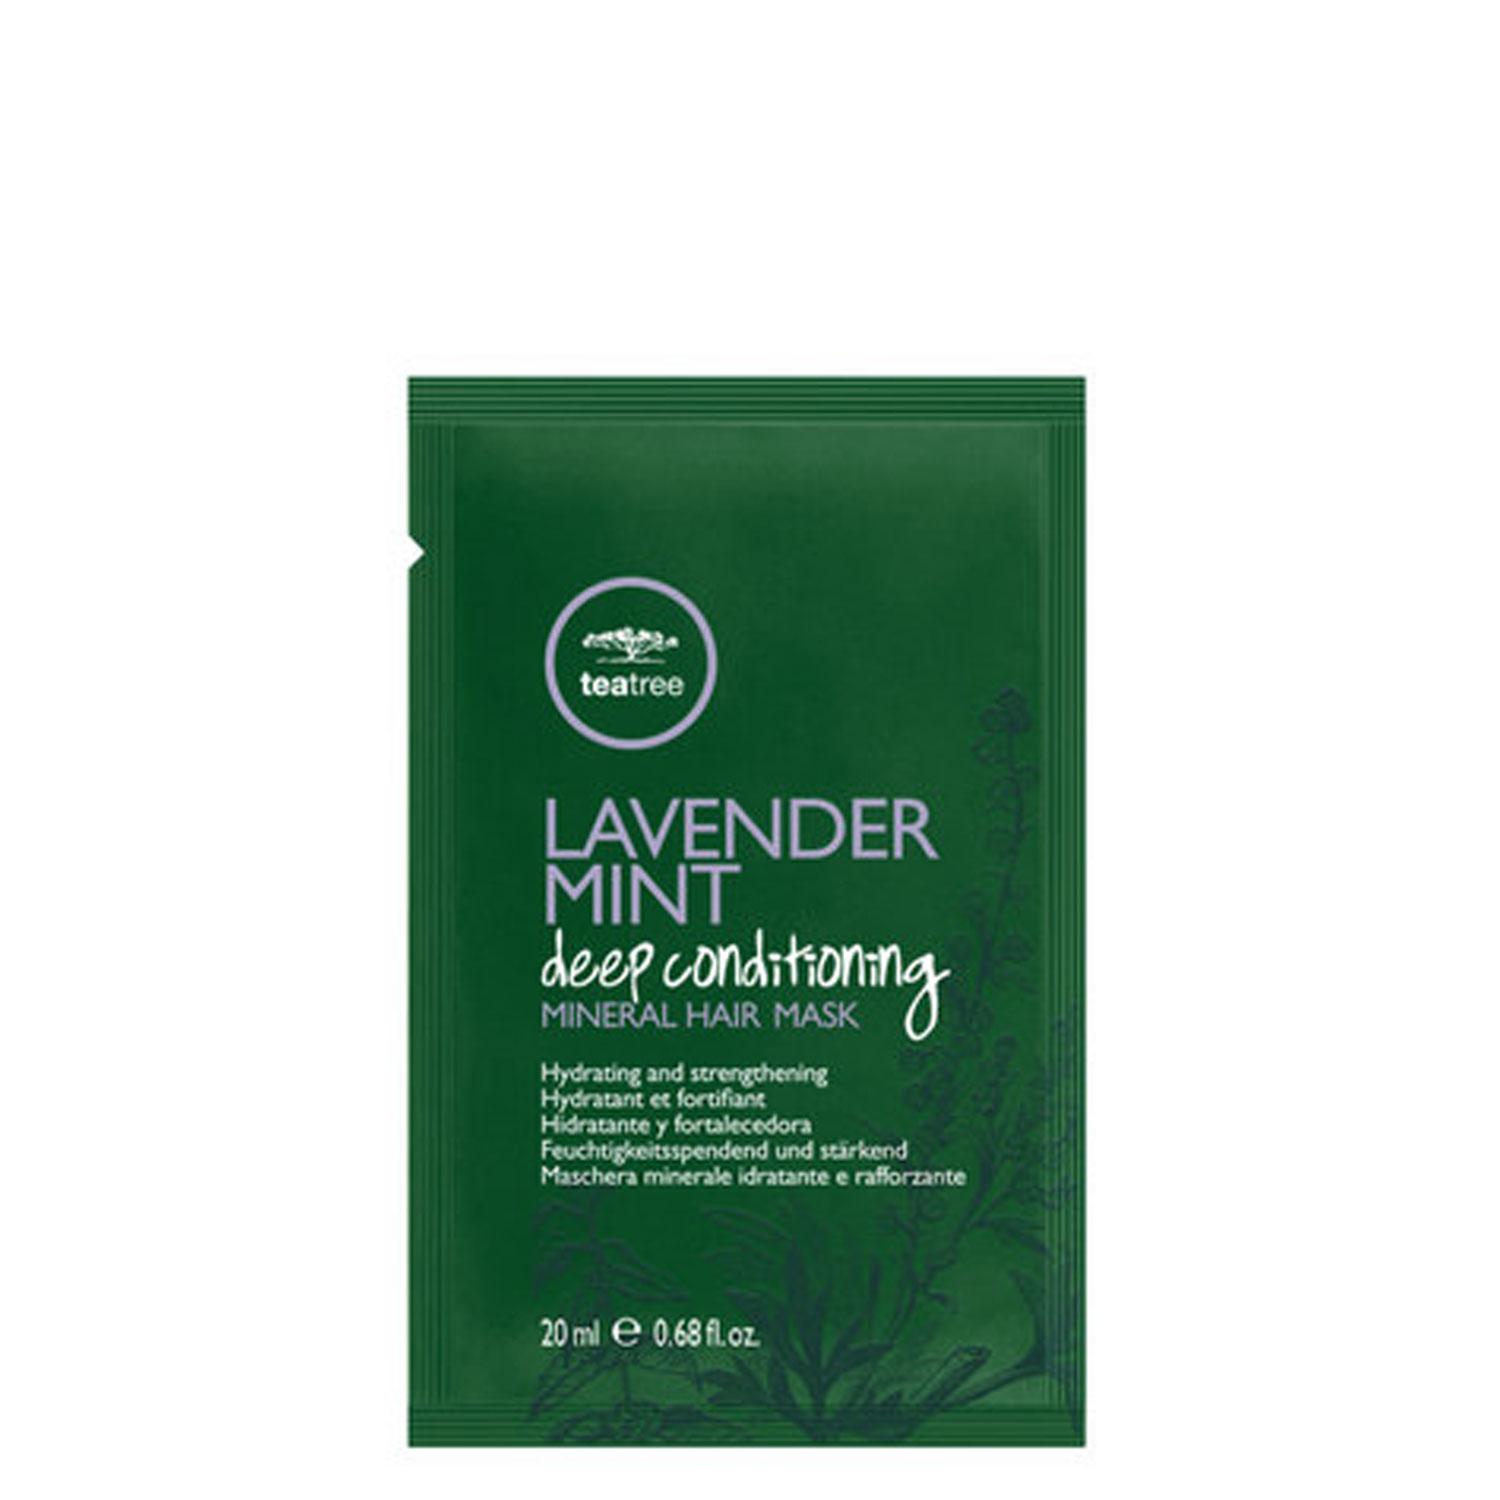 Tea Tree Lavender Mint - Deep Conditioning Mineral Hair Mask